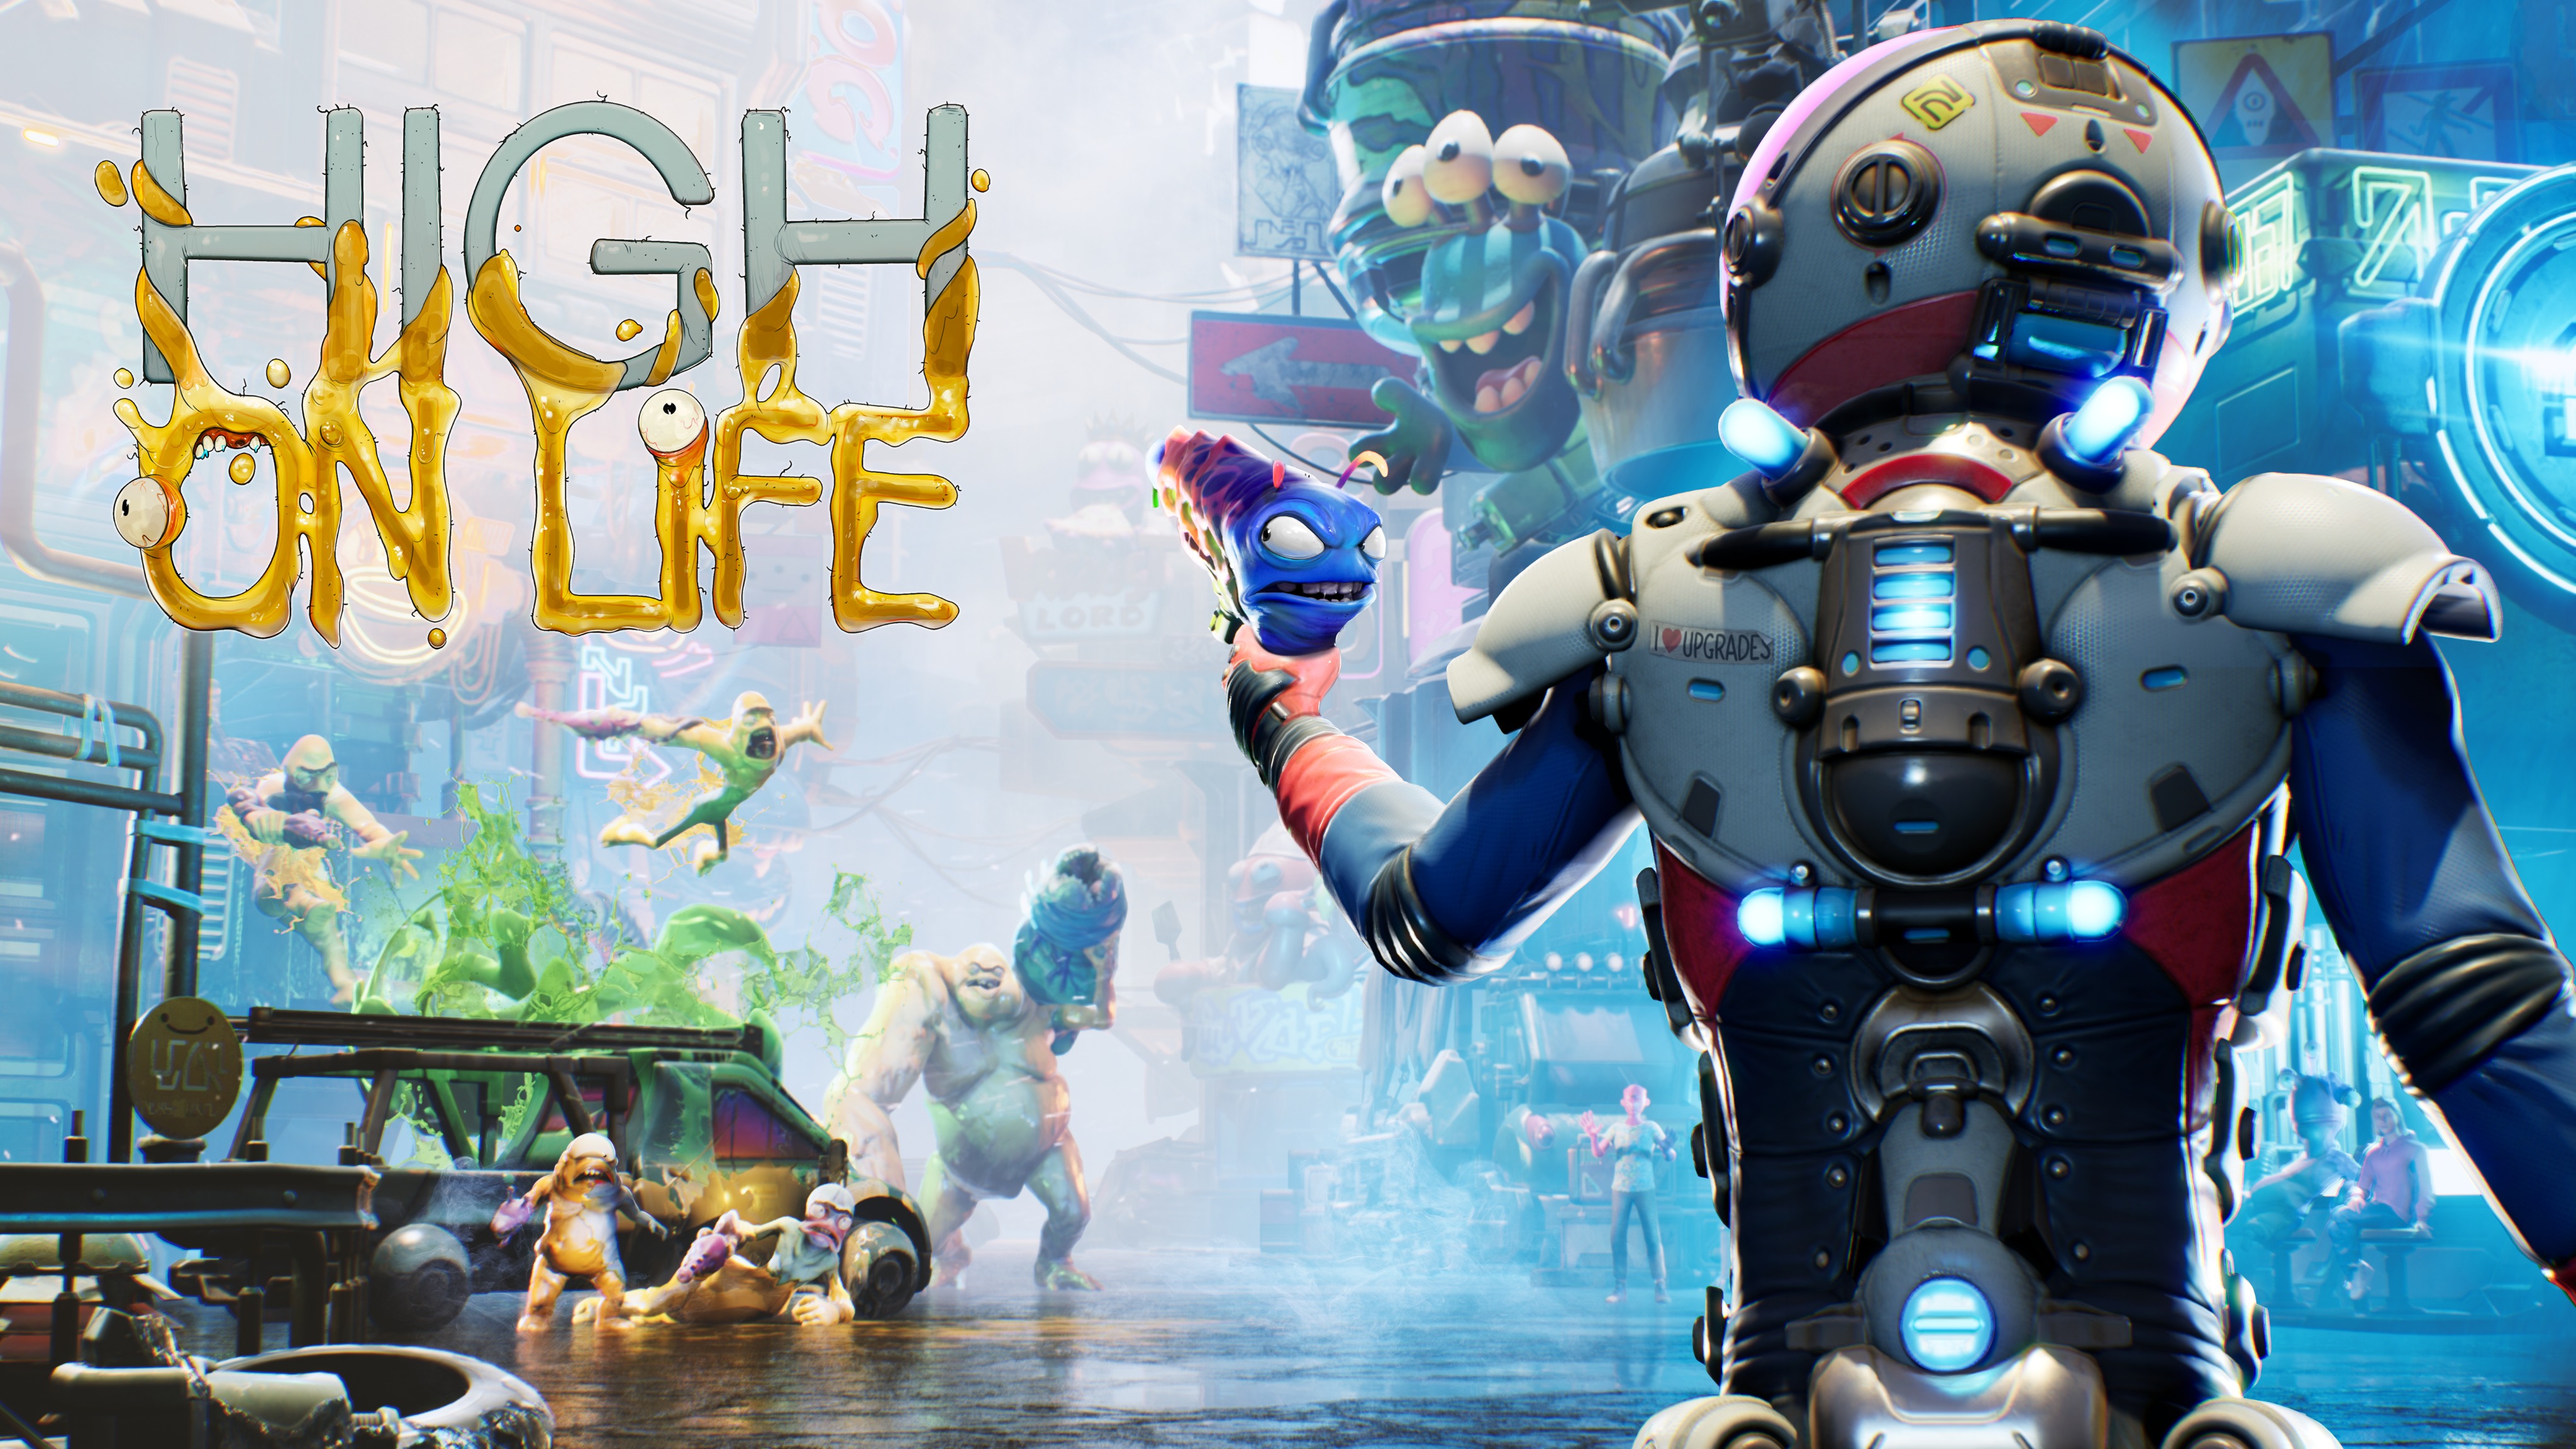 High On Life Release Date, Trailer And Gameplay - What We Know So Far